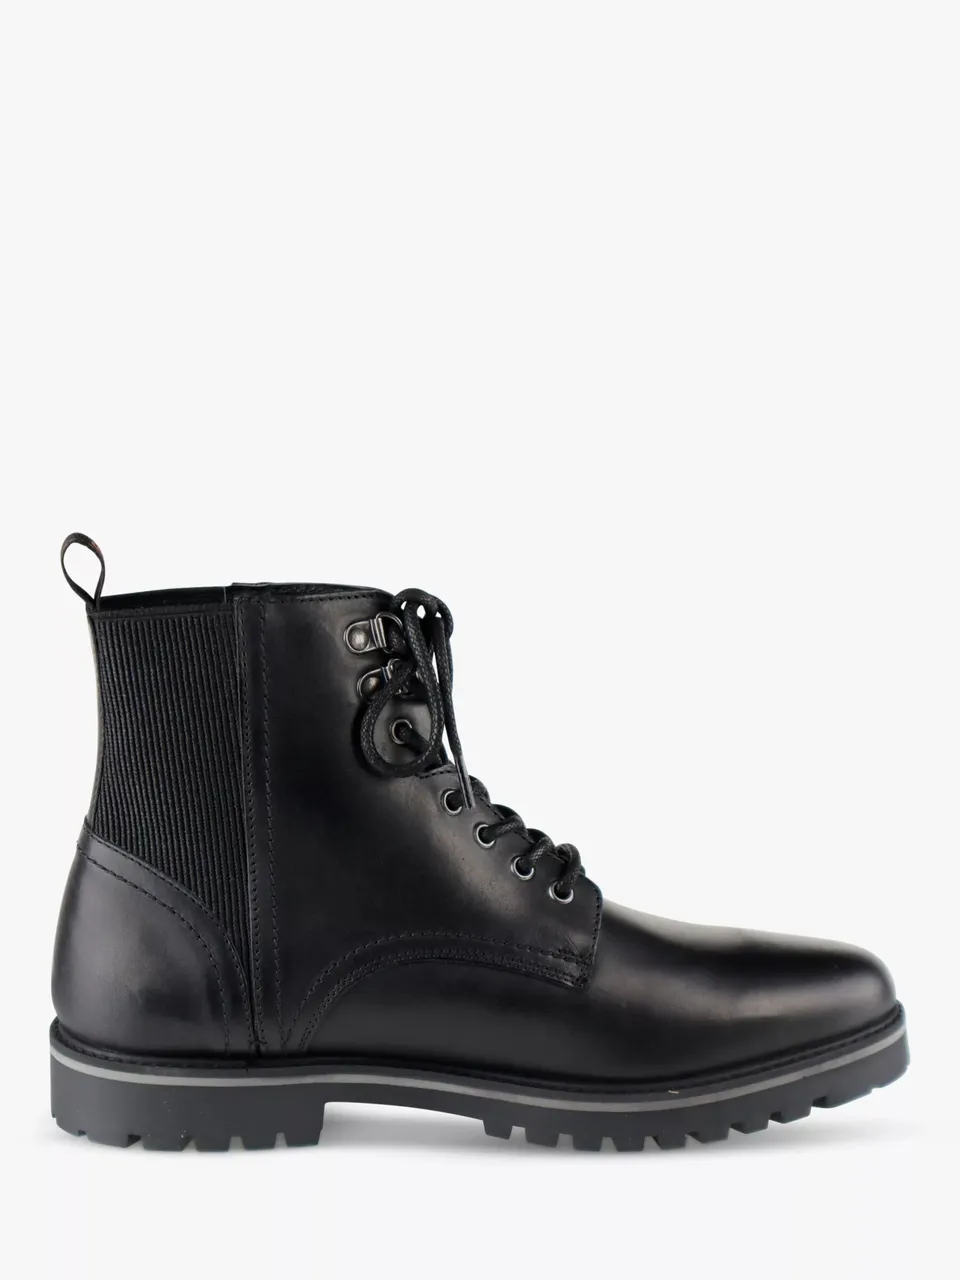 Silver Street London Manchester Leather Hiker Boots - Black - Male